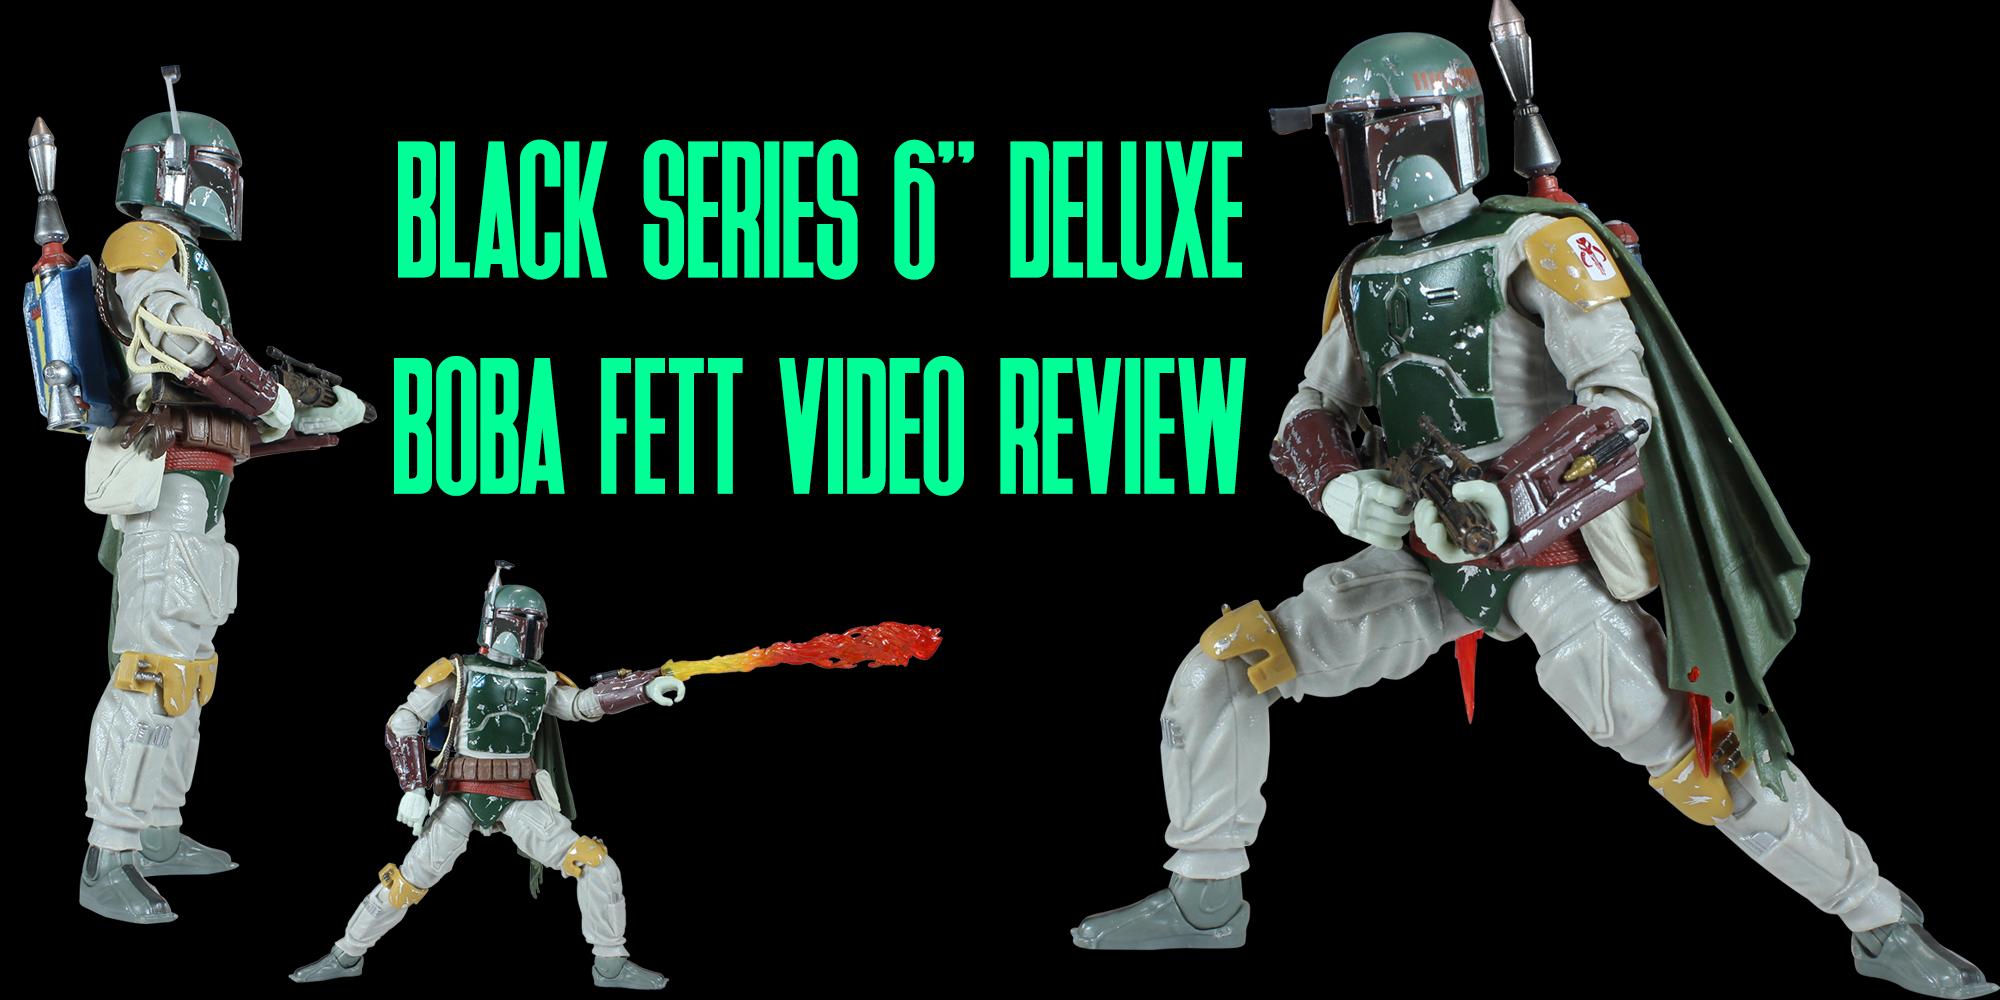 Watch The Black Series 6" Boba Fett Deluxe Video Review